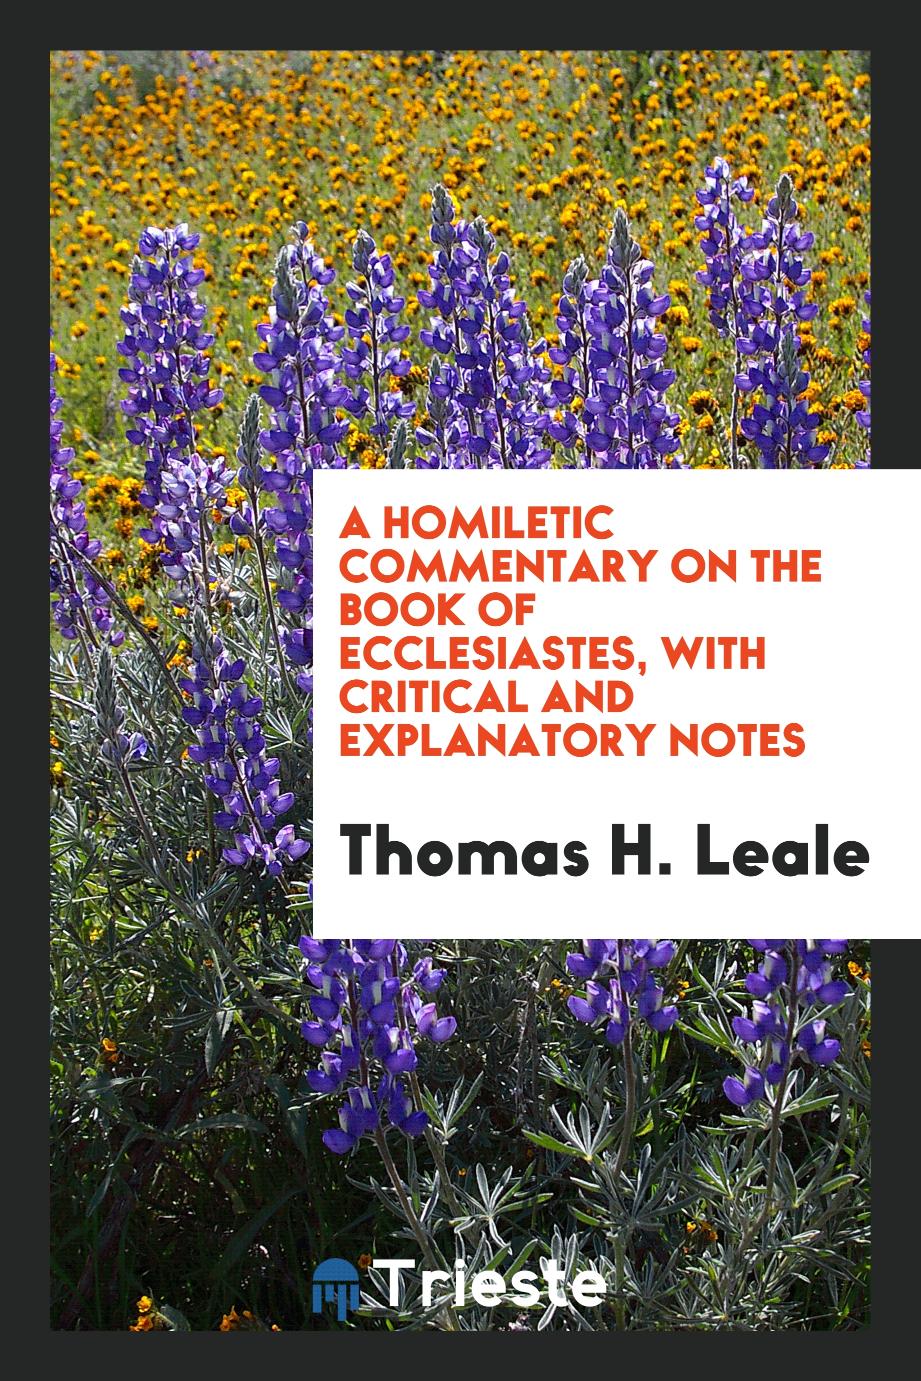 A Homiletic Commentary on the Book of Ecclesiastes, with Critical and Explanatory Notes